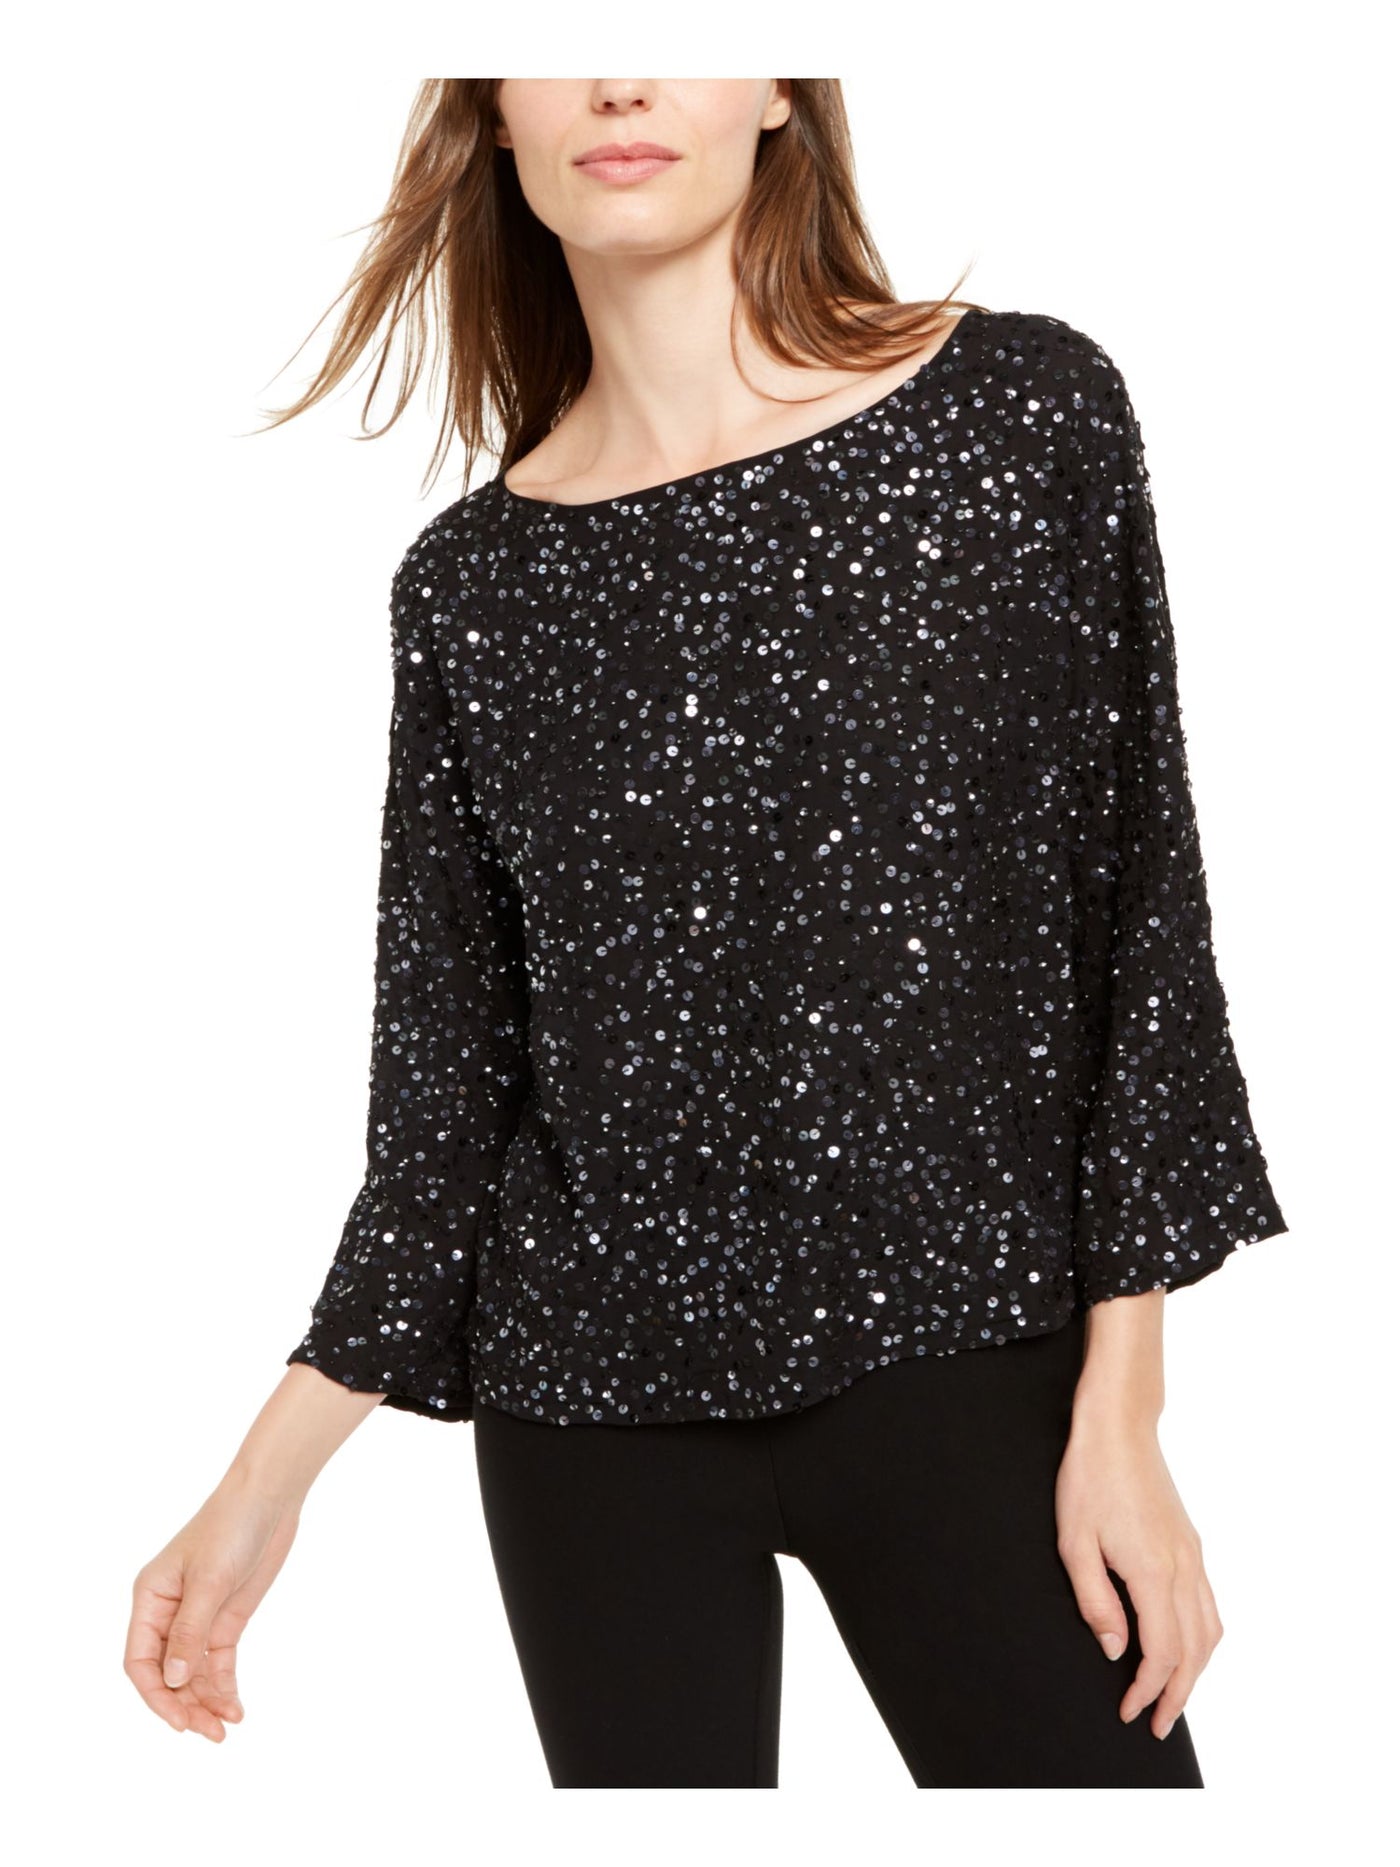 EILEEN FISHER Womens Black Silk Sequined Bell Sleeve Boat Neck Party Top S